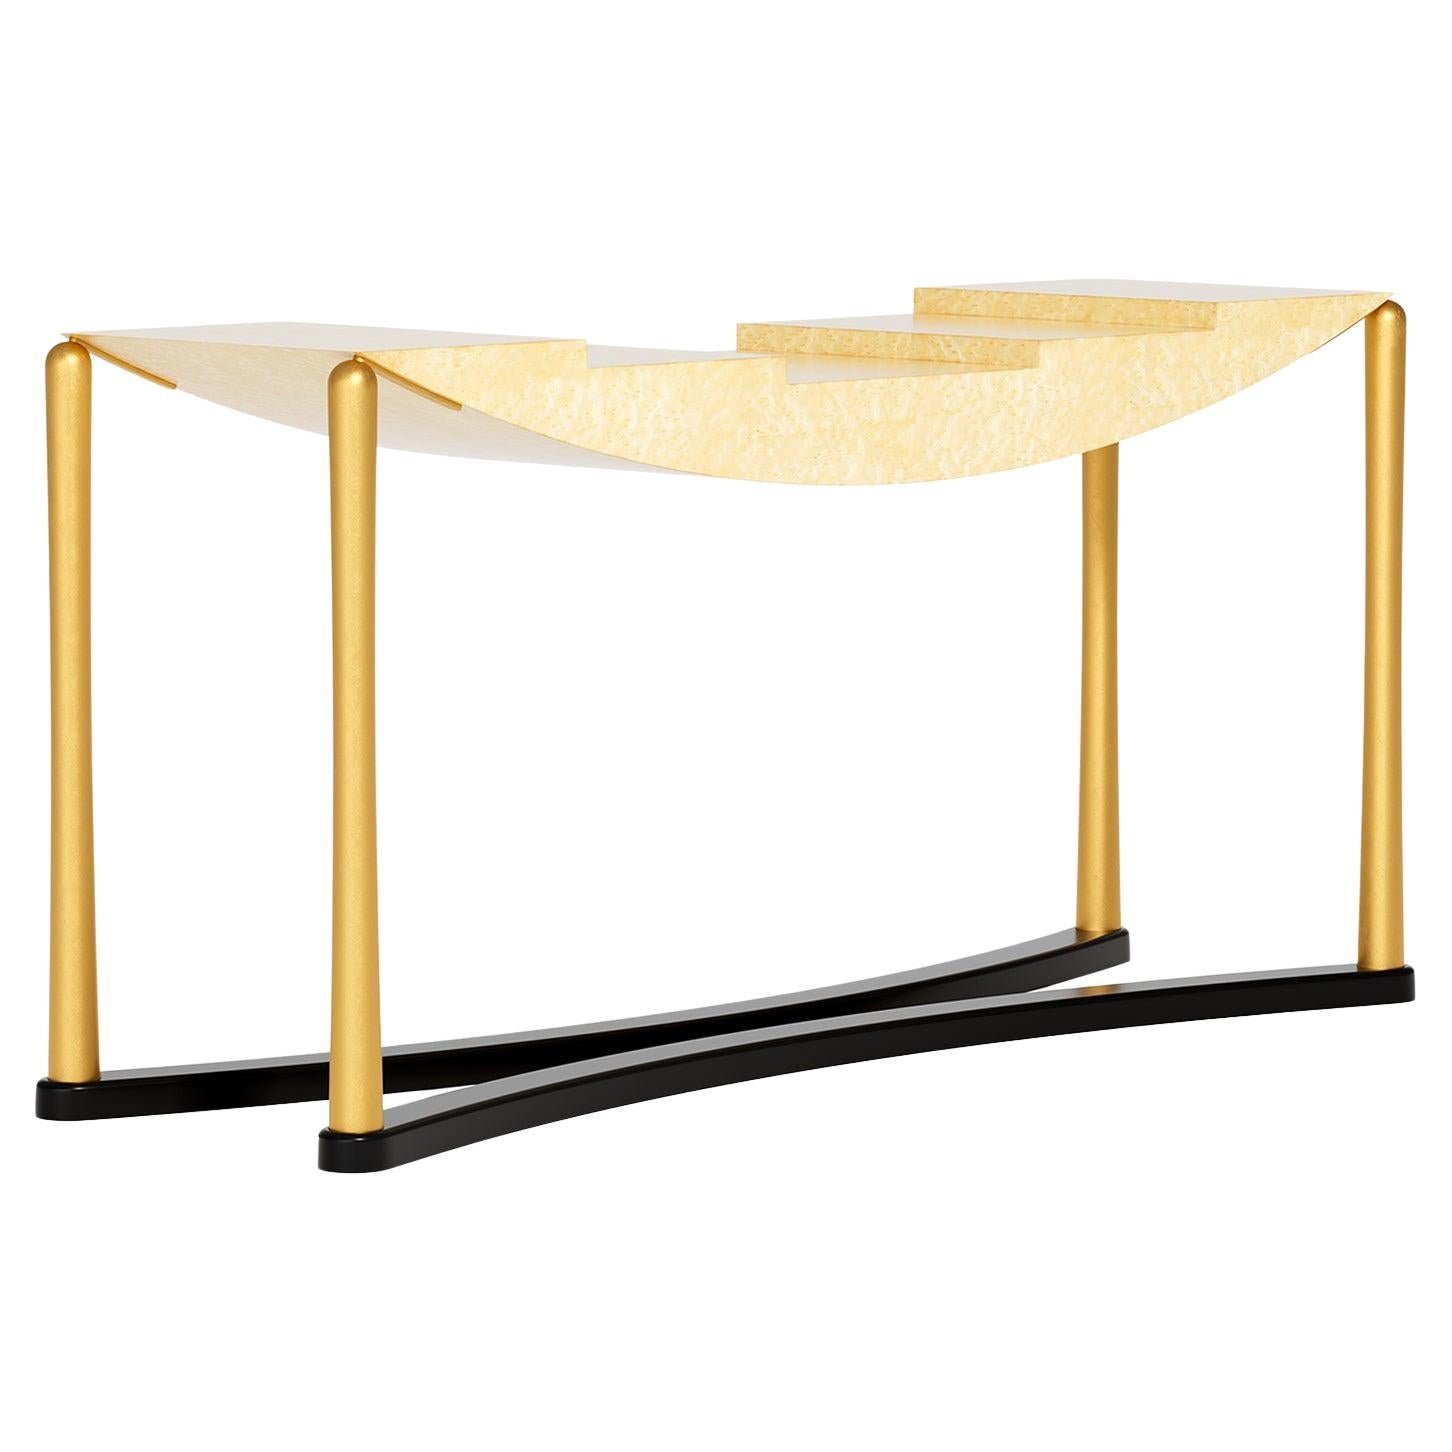 Schwarzenberg Console Table By Hans Hollein for Memphis Milano Collection im Angebot